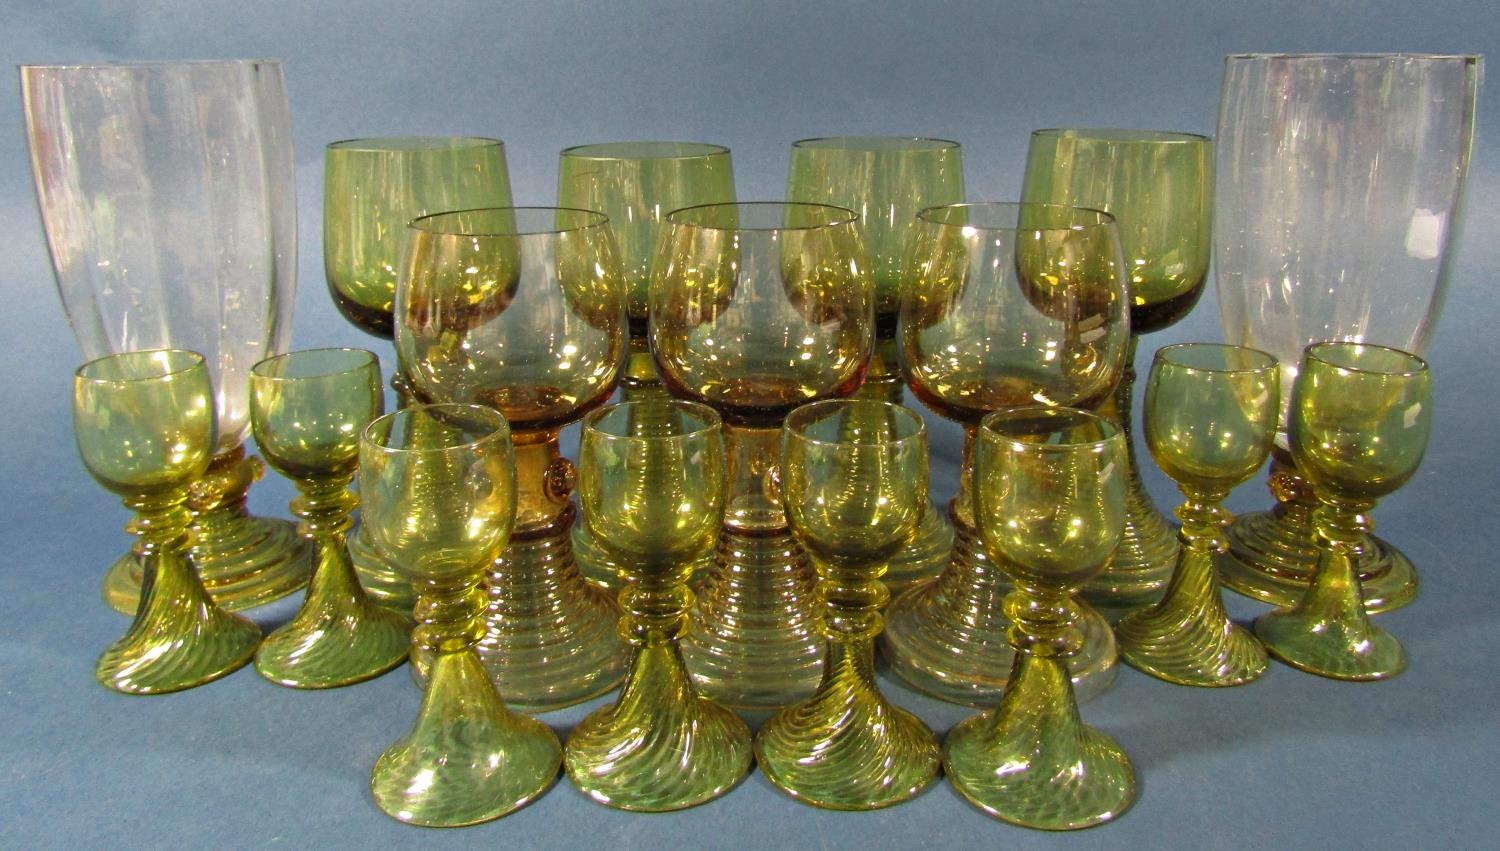 Fifteen near matching pale olive green spiral beehive wine glasses of varying sizes, and two similar